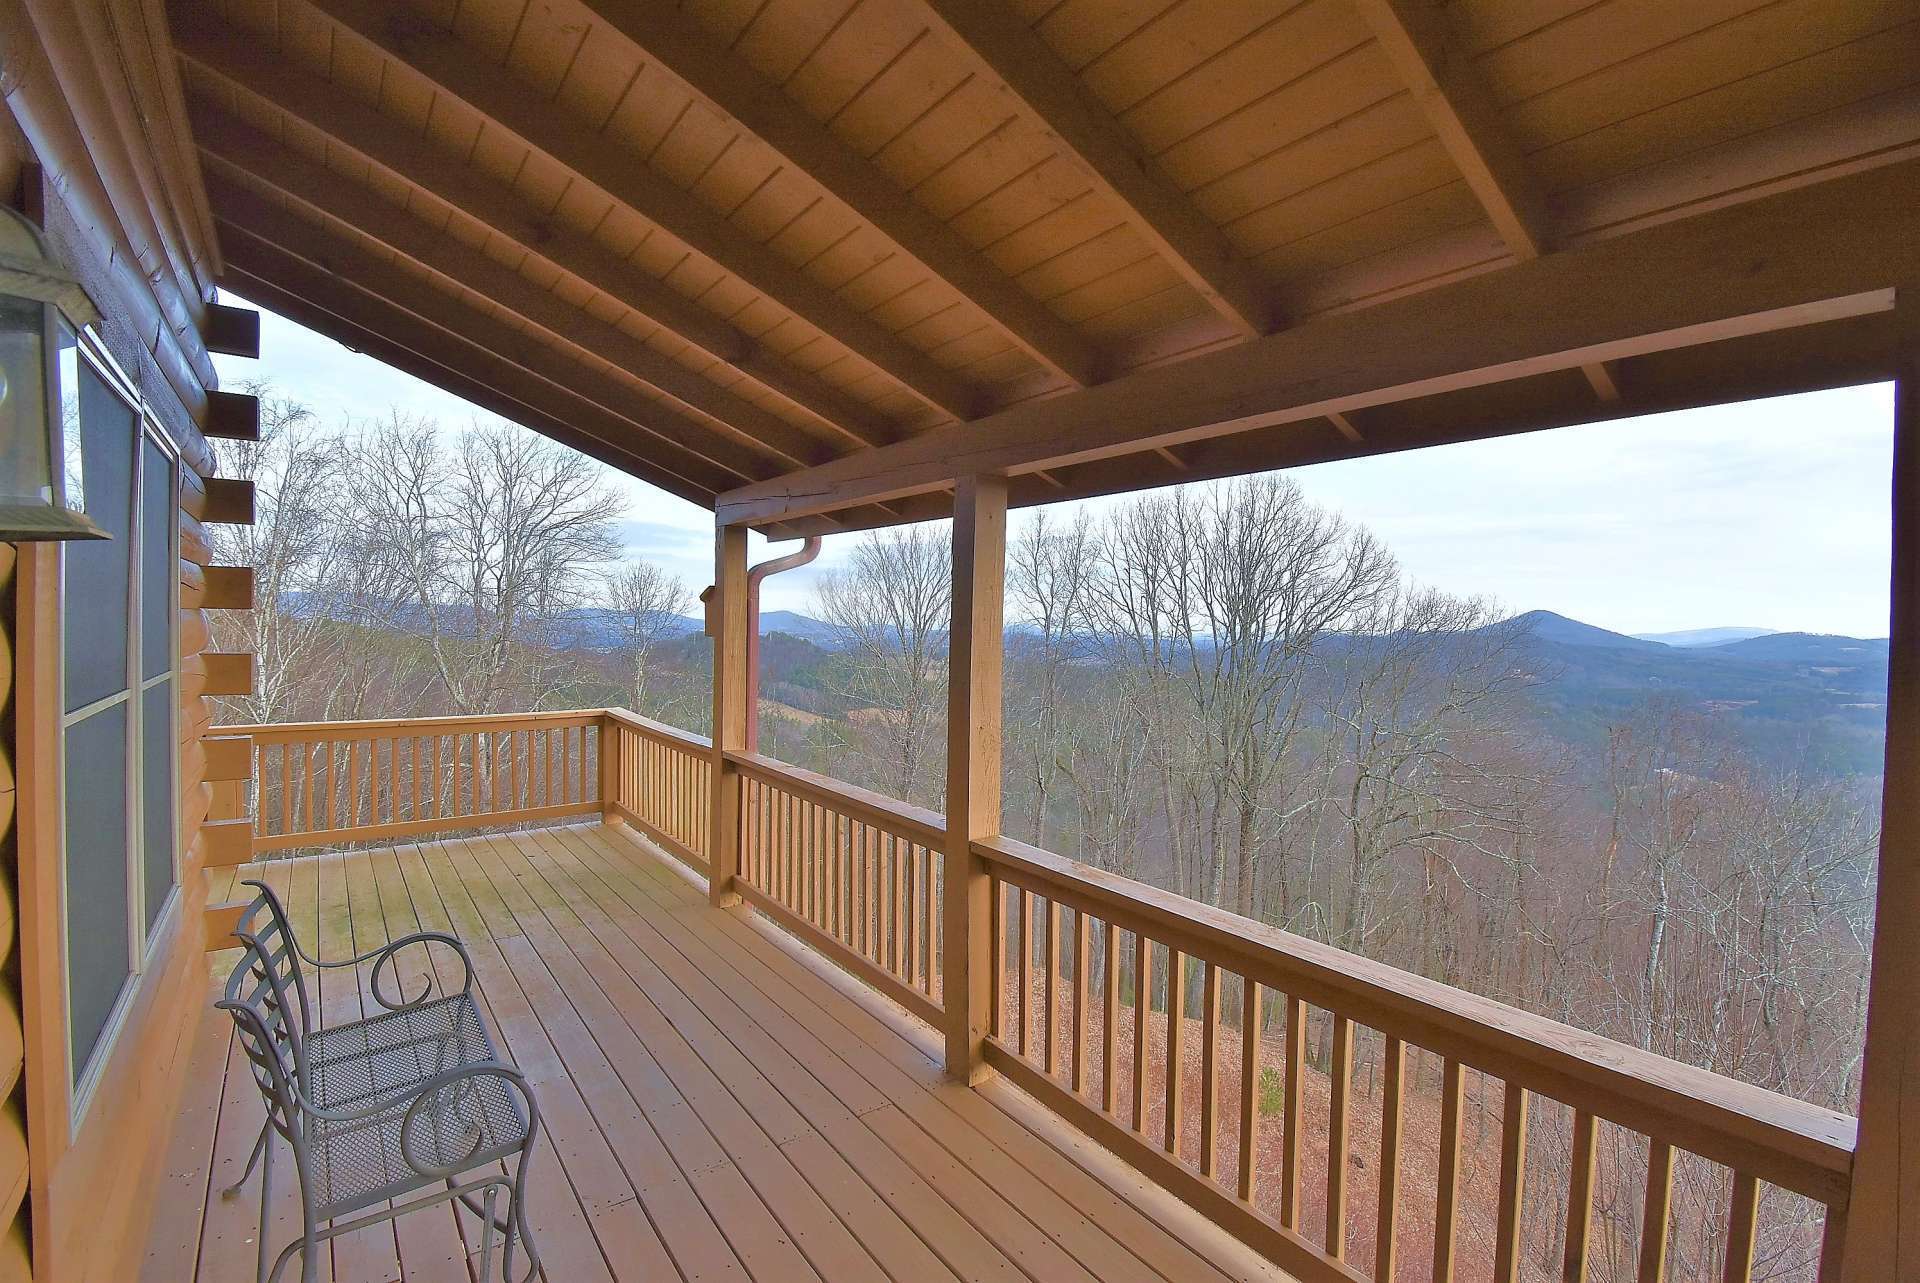 A partially covered wrap around deck provides a relaxing place to enjoy layered long range views and a front seat to Nature's symphony and changing colors.